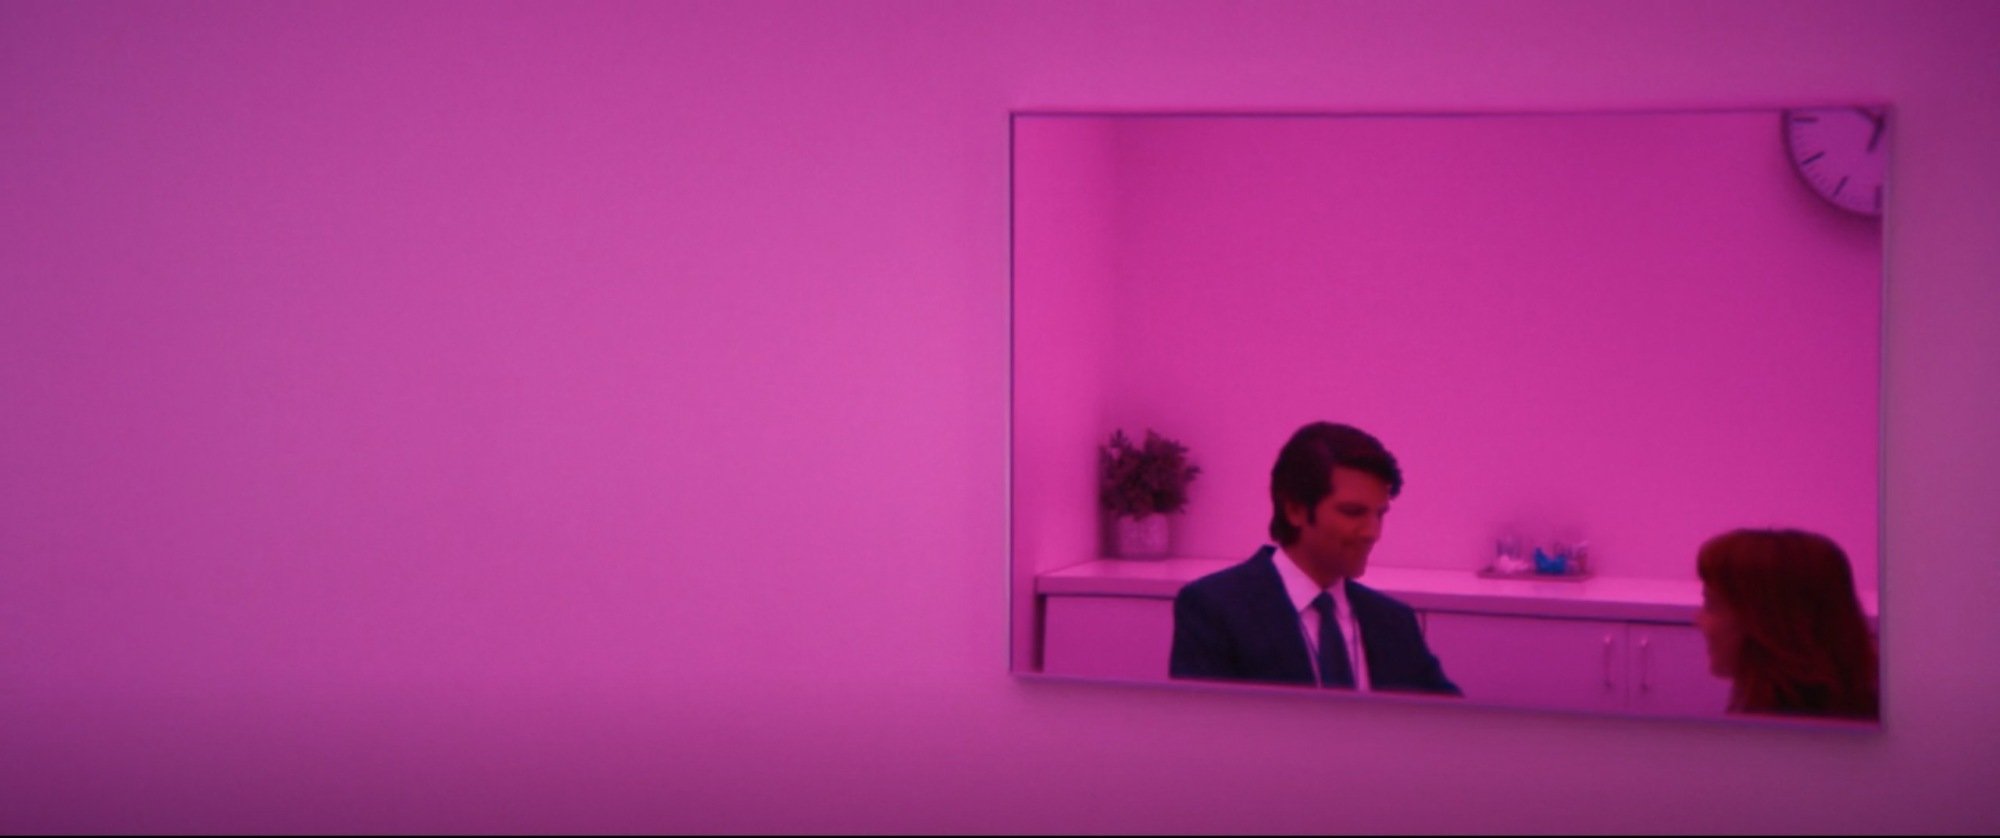 The reflection of man and a woman seen in a mirror in a room with pink lighting.